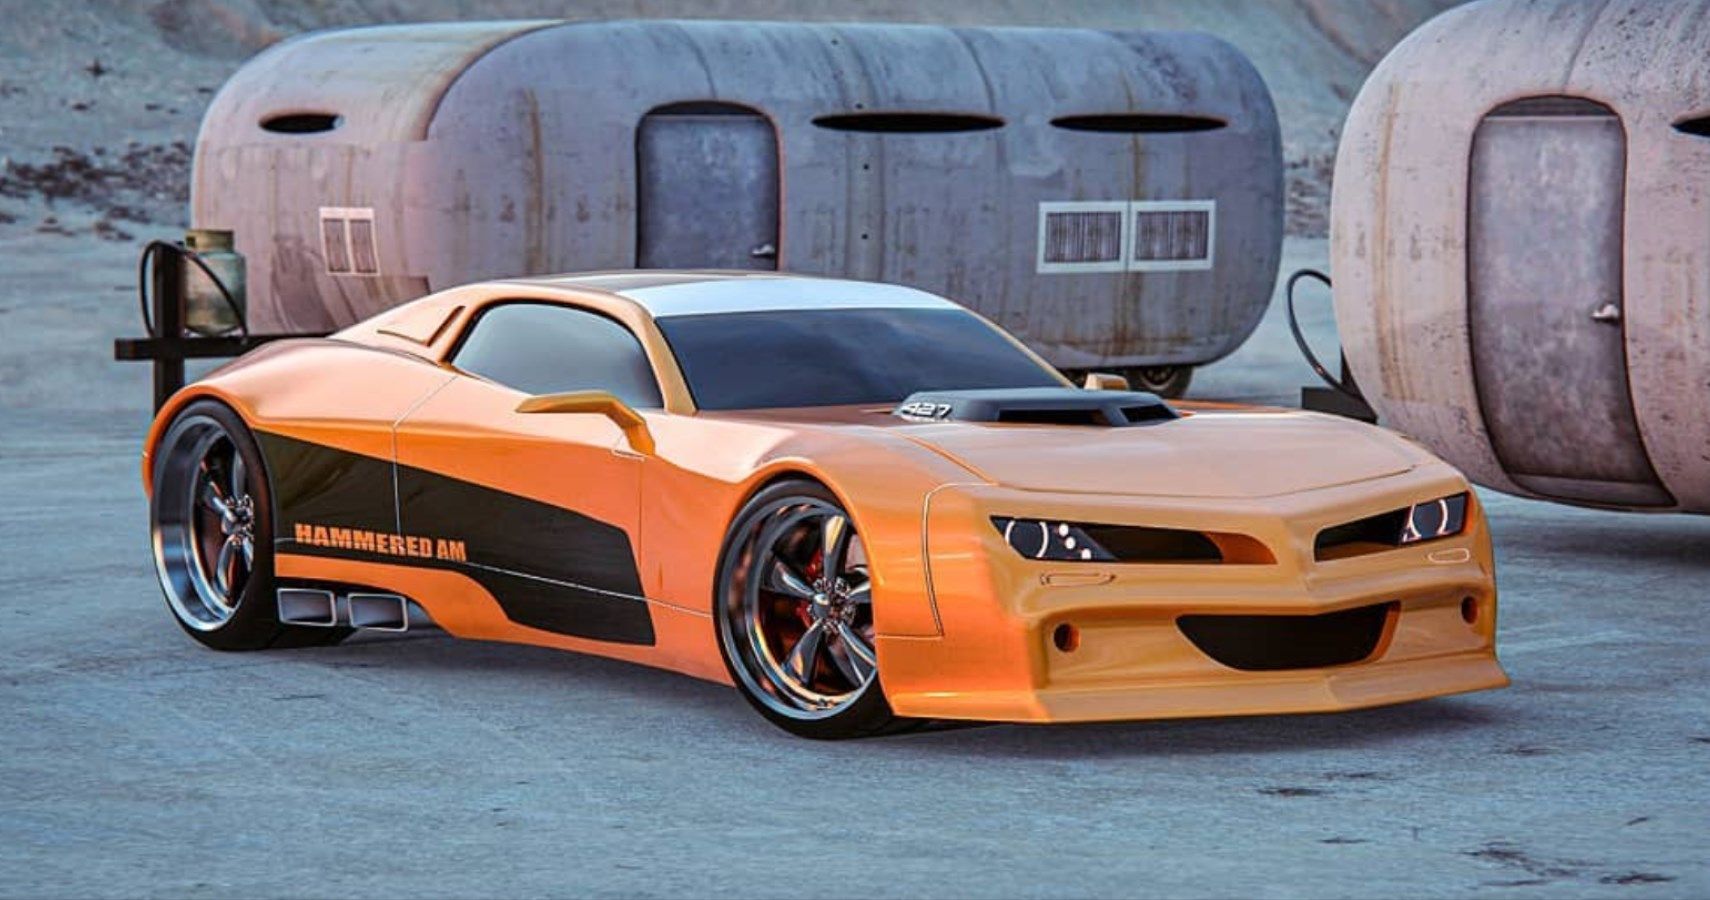 Hammered Arm Concept Sporting Serious Pontiac Vibes Belongs In 'Fast And  Furious